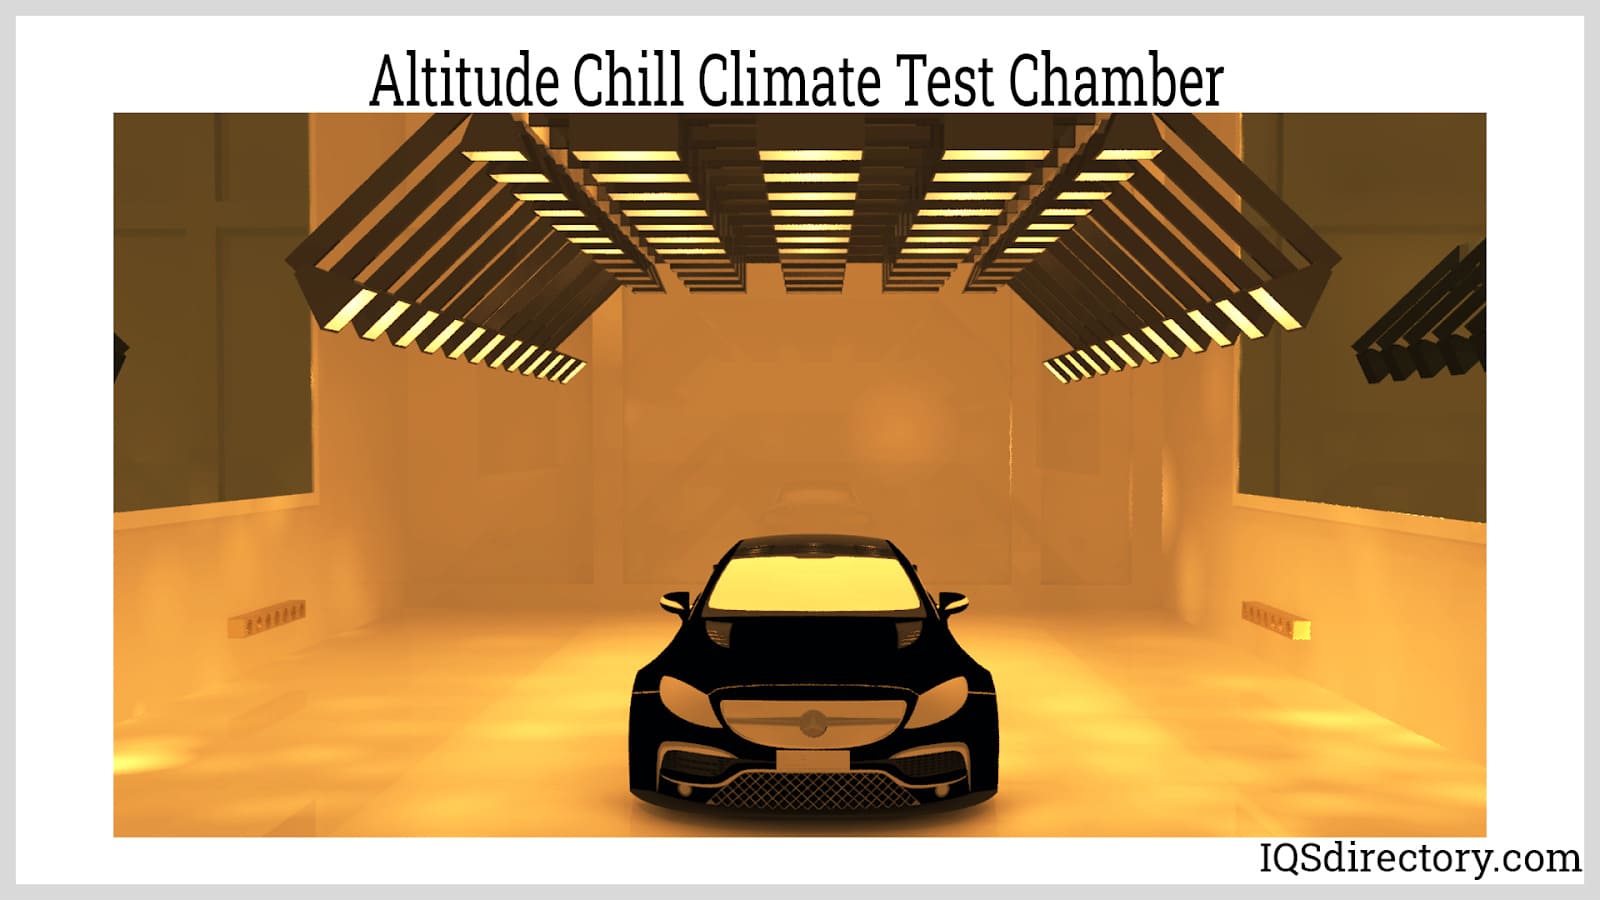 Altitude Chill Climate Test Chamber